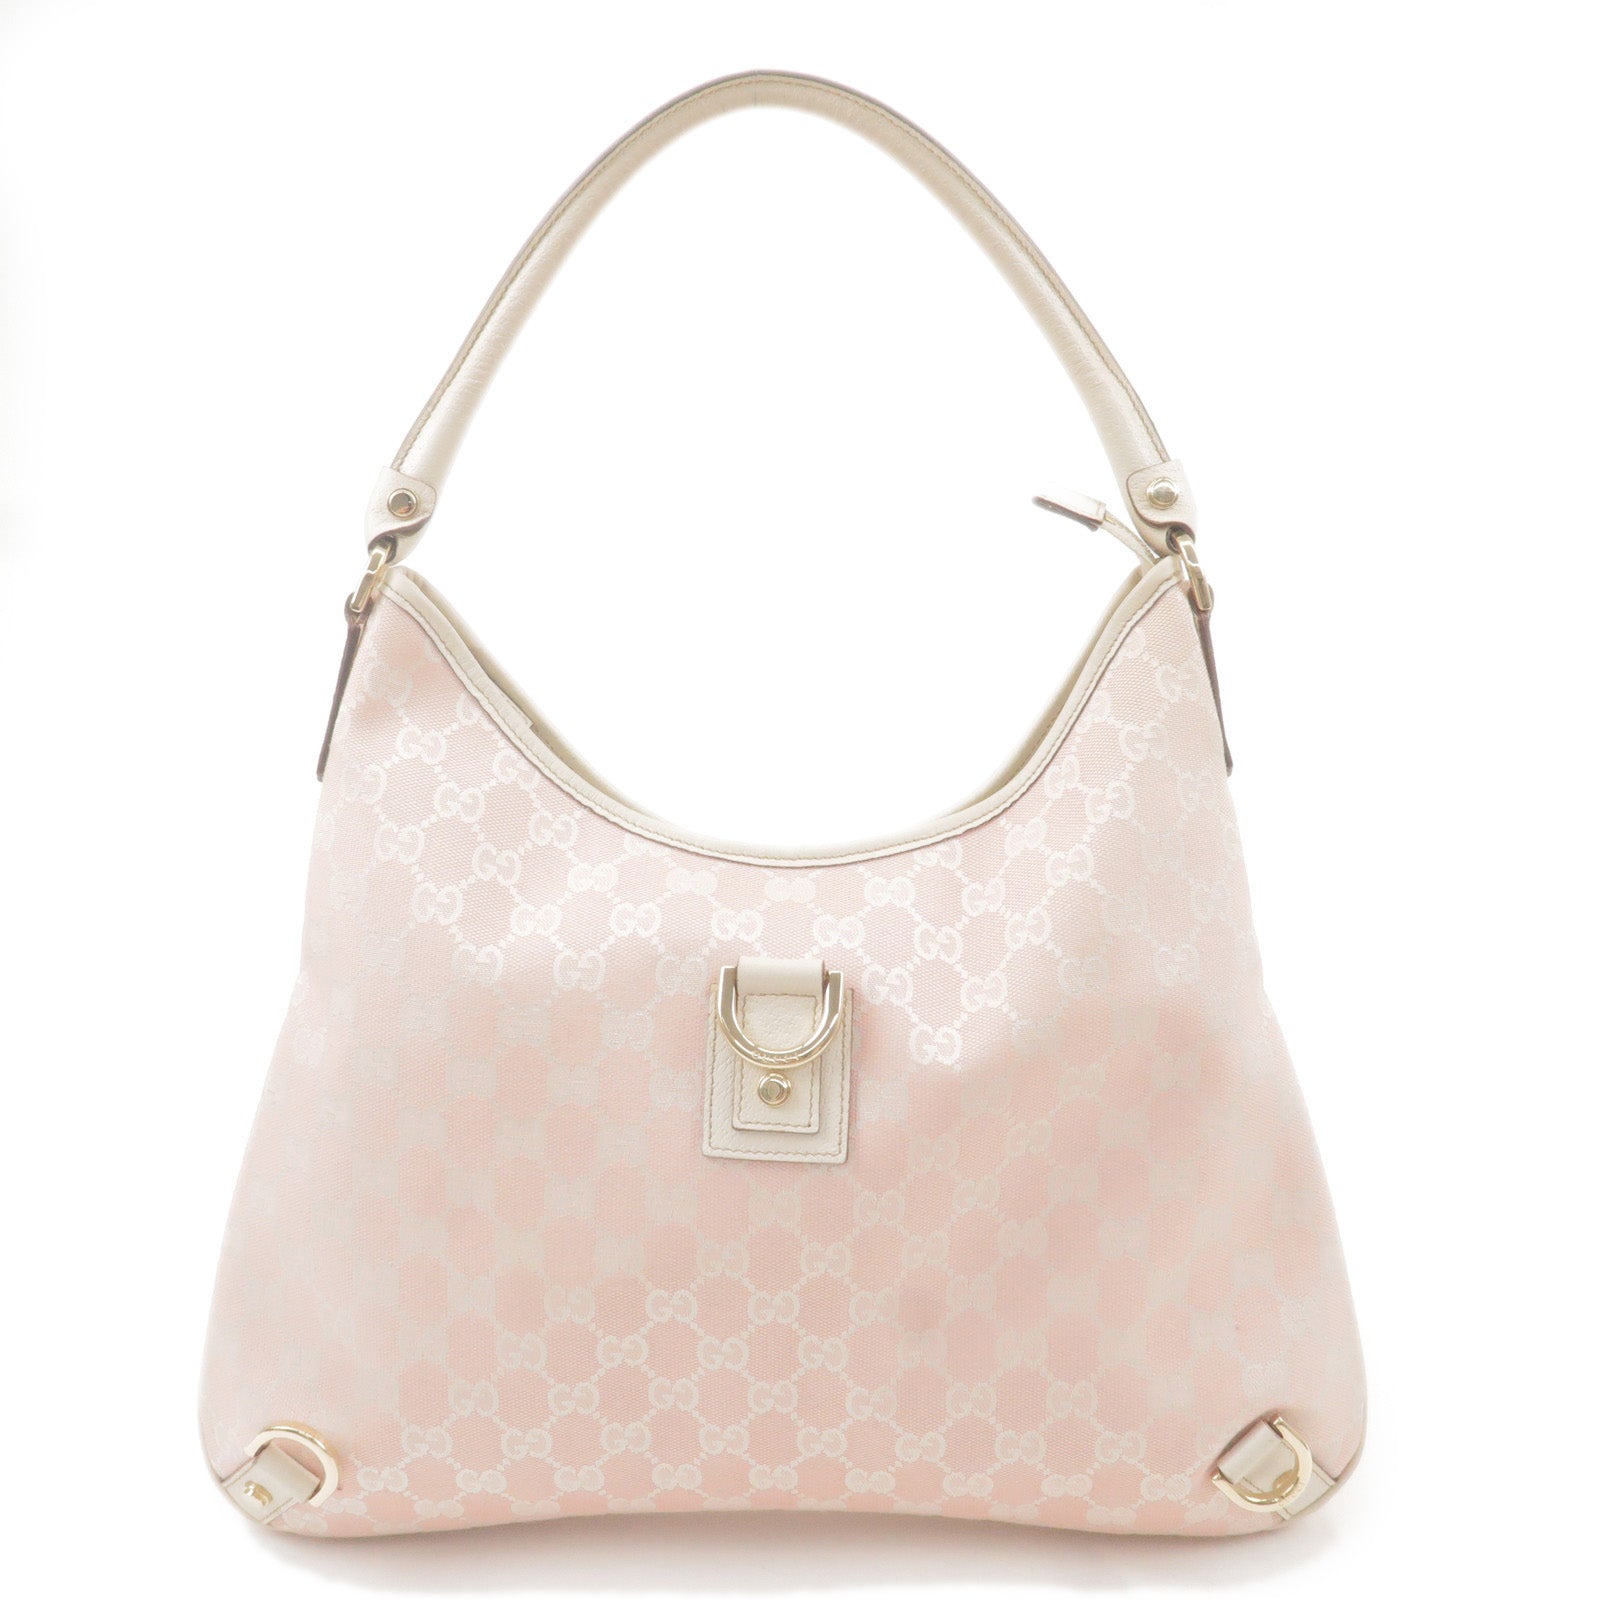 GUCCI-Abbey-GG-Canvas-Leather-Shoulder-Bag-Pink-White-130737